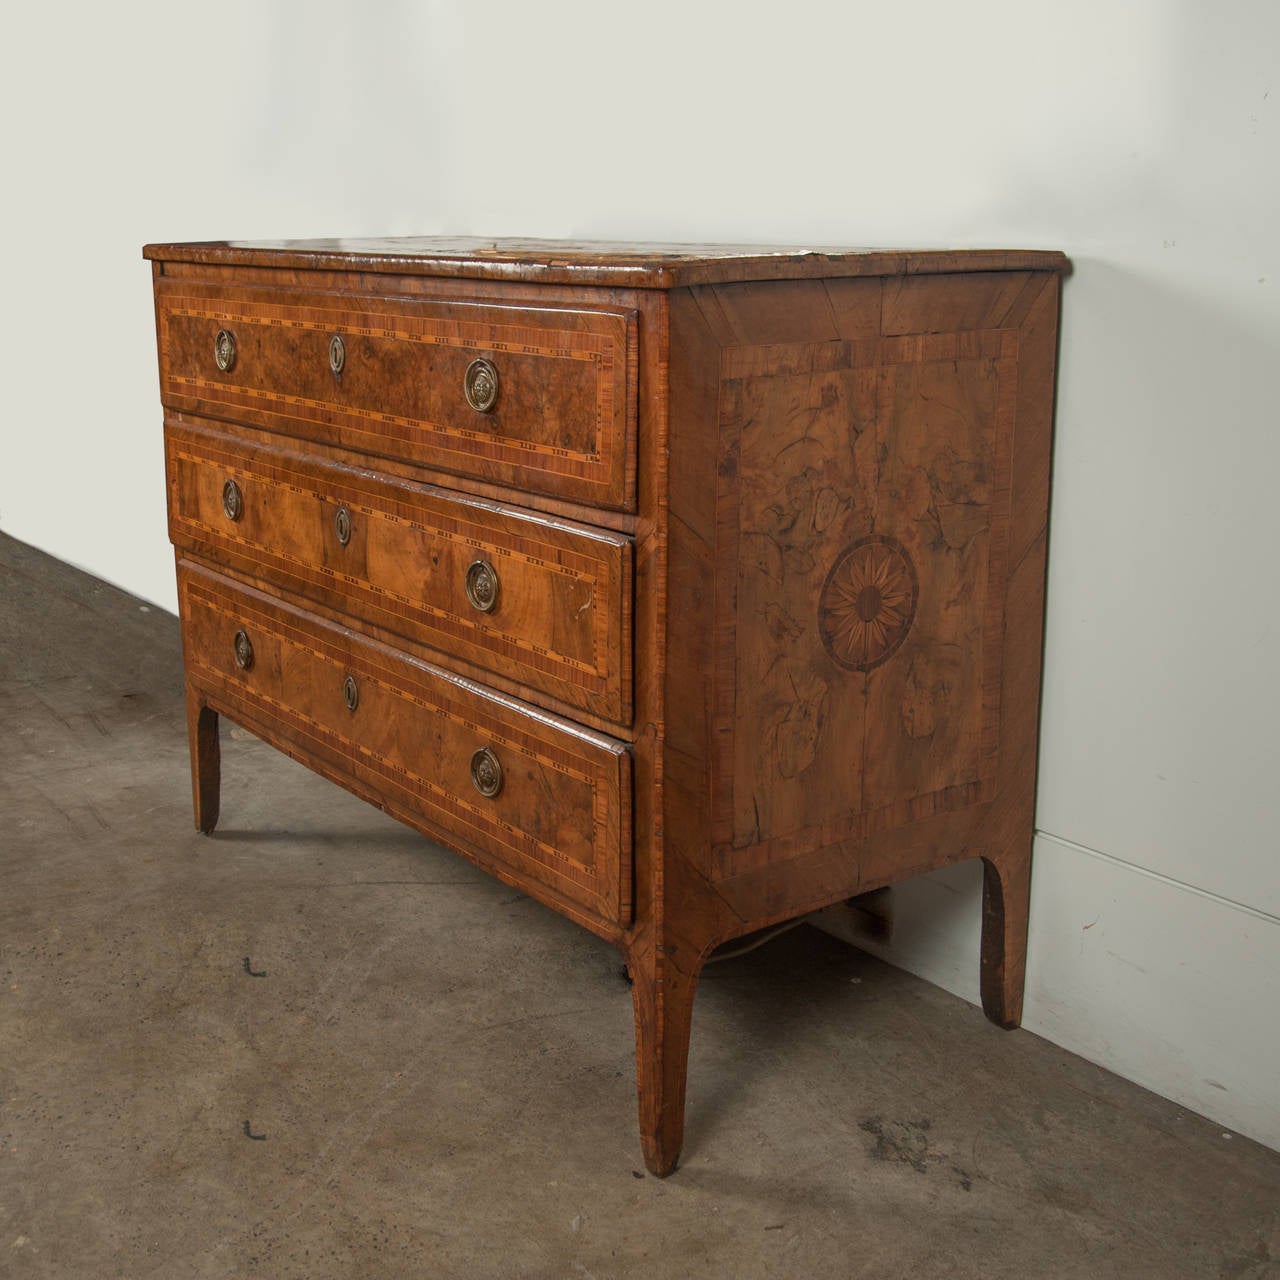 Late C18Th Italian Marquetry Commode Rectangular Top 3 Long Drawers Tapered Legs Veneered In Quarter Cut Book Matched Walnut With Exotic Timbers To The Central Boss Cross Banded Borders Top Sides And Drawers Drop Ring Brass Handles. C1780 H900 L1190